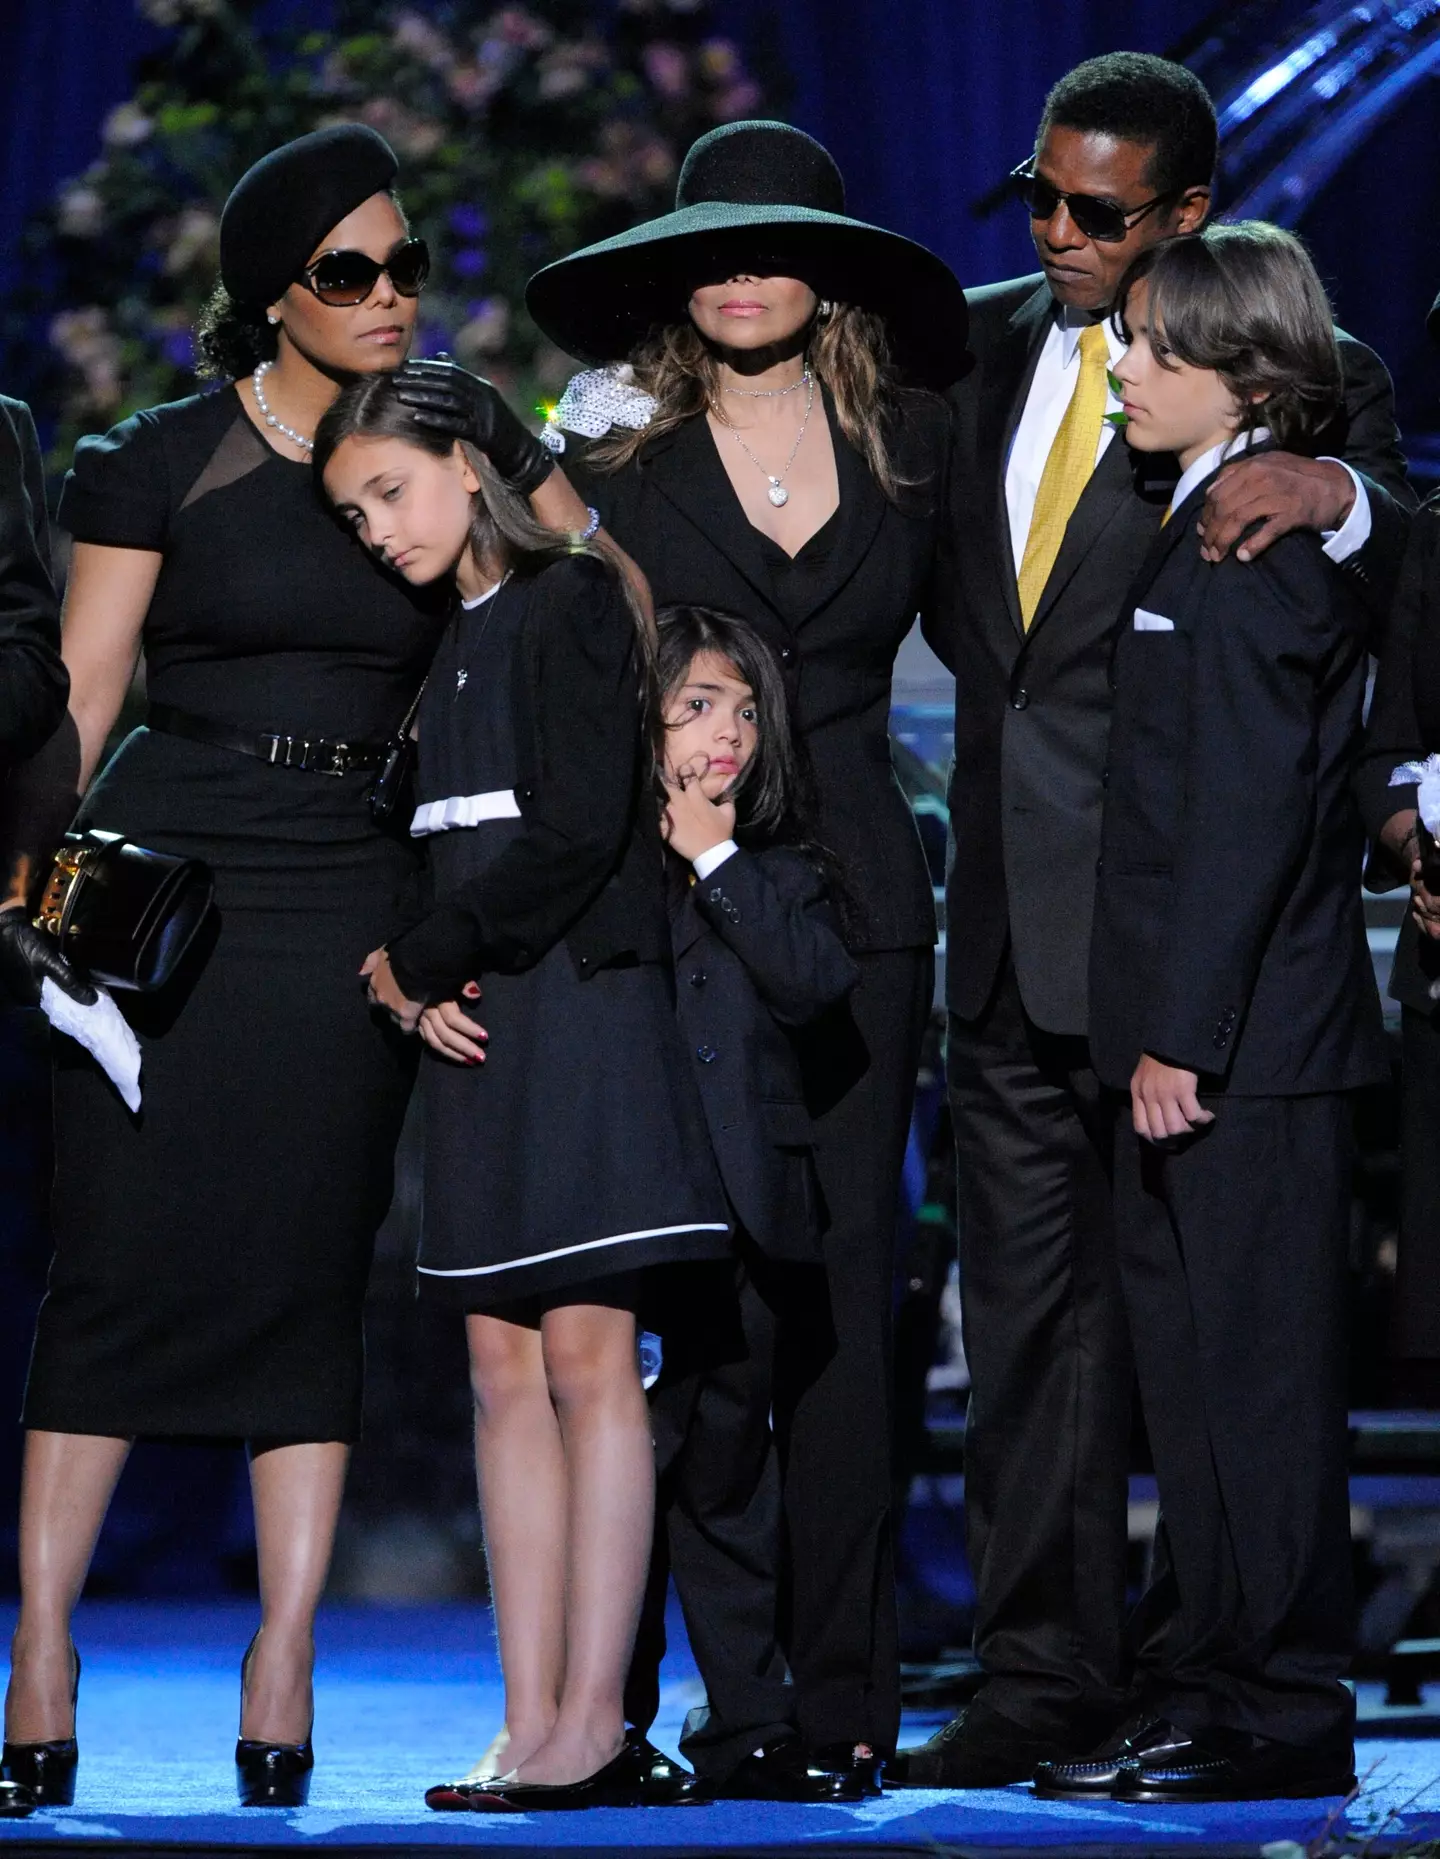 Paris seen at Michael Jackson's memorial service with her relatives in 2009.